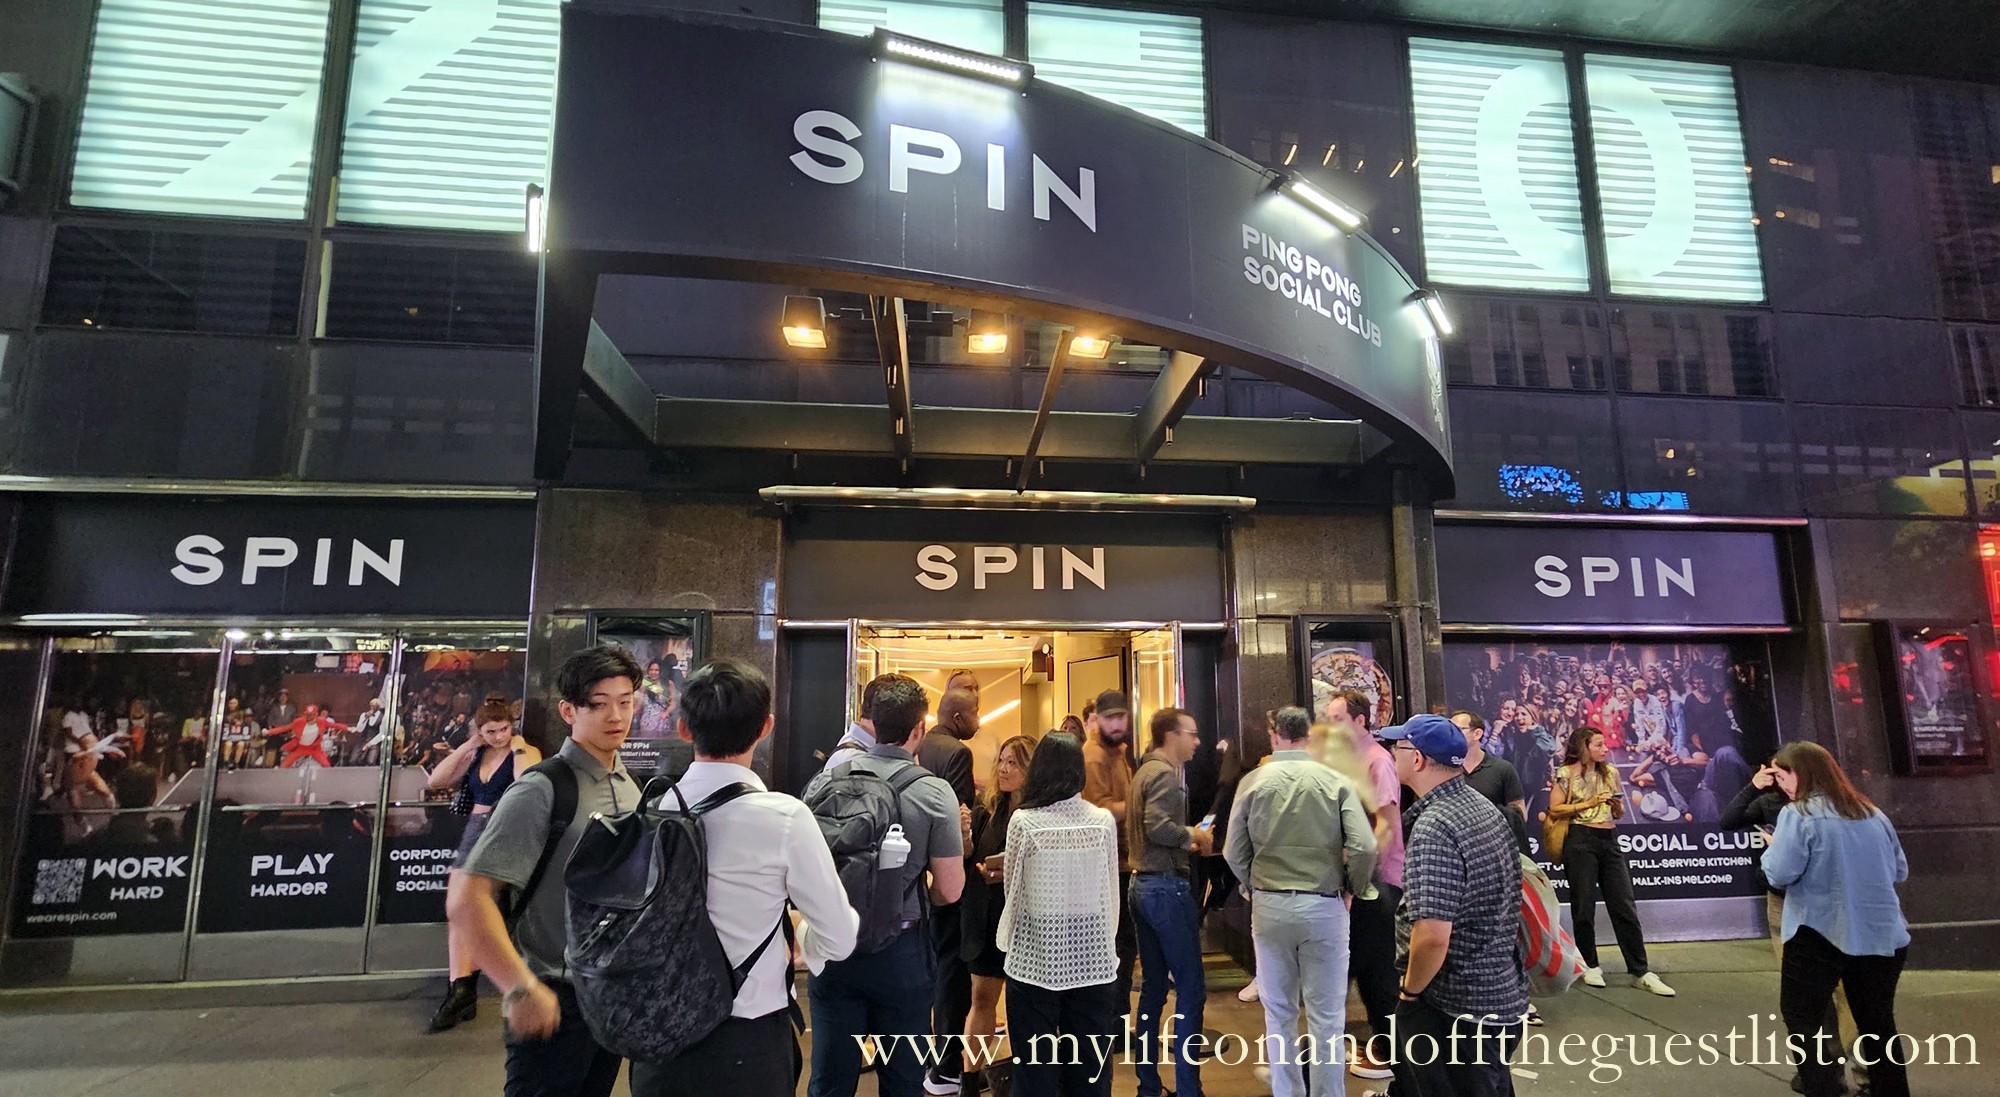 SPIN Midtown Ping Pong Social Club Opens in Times Square